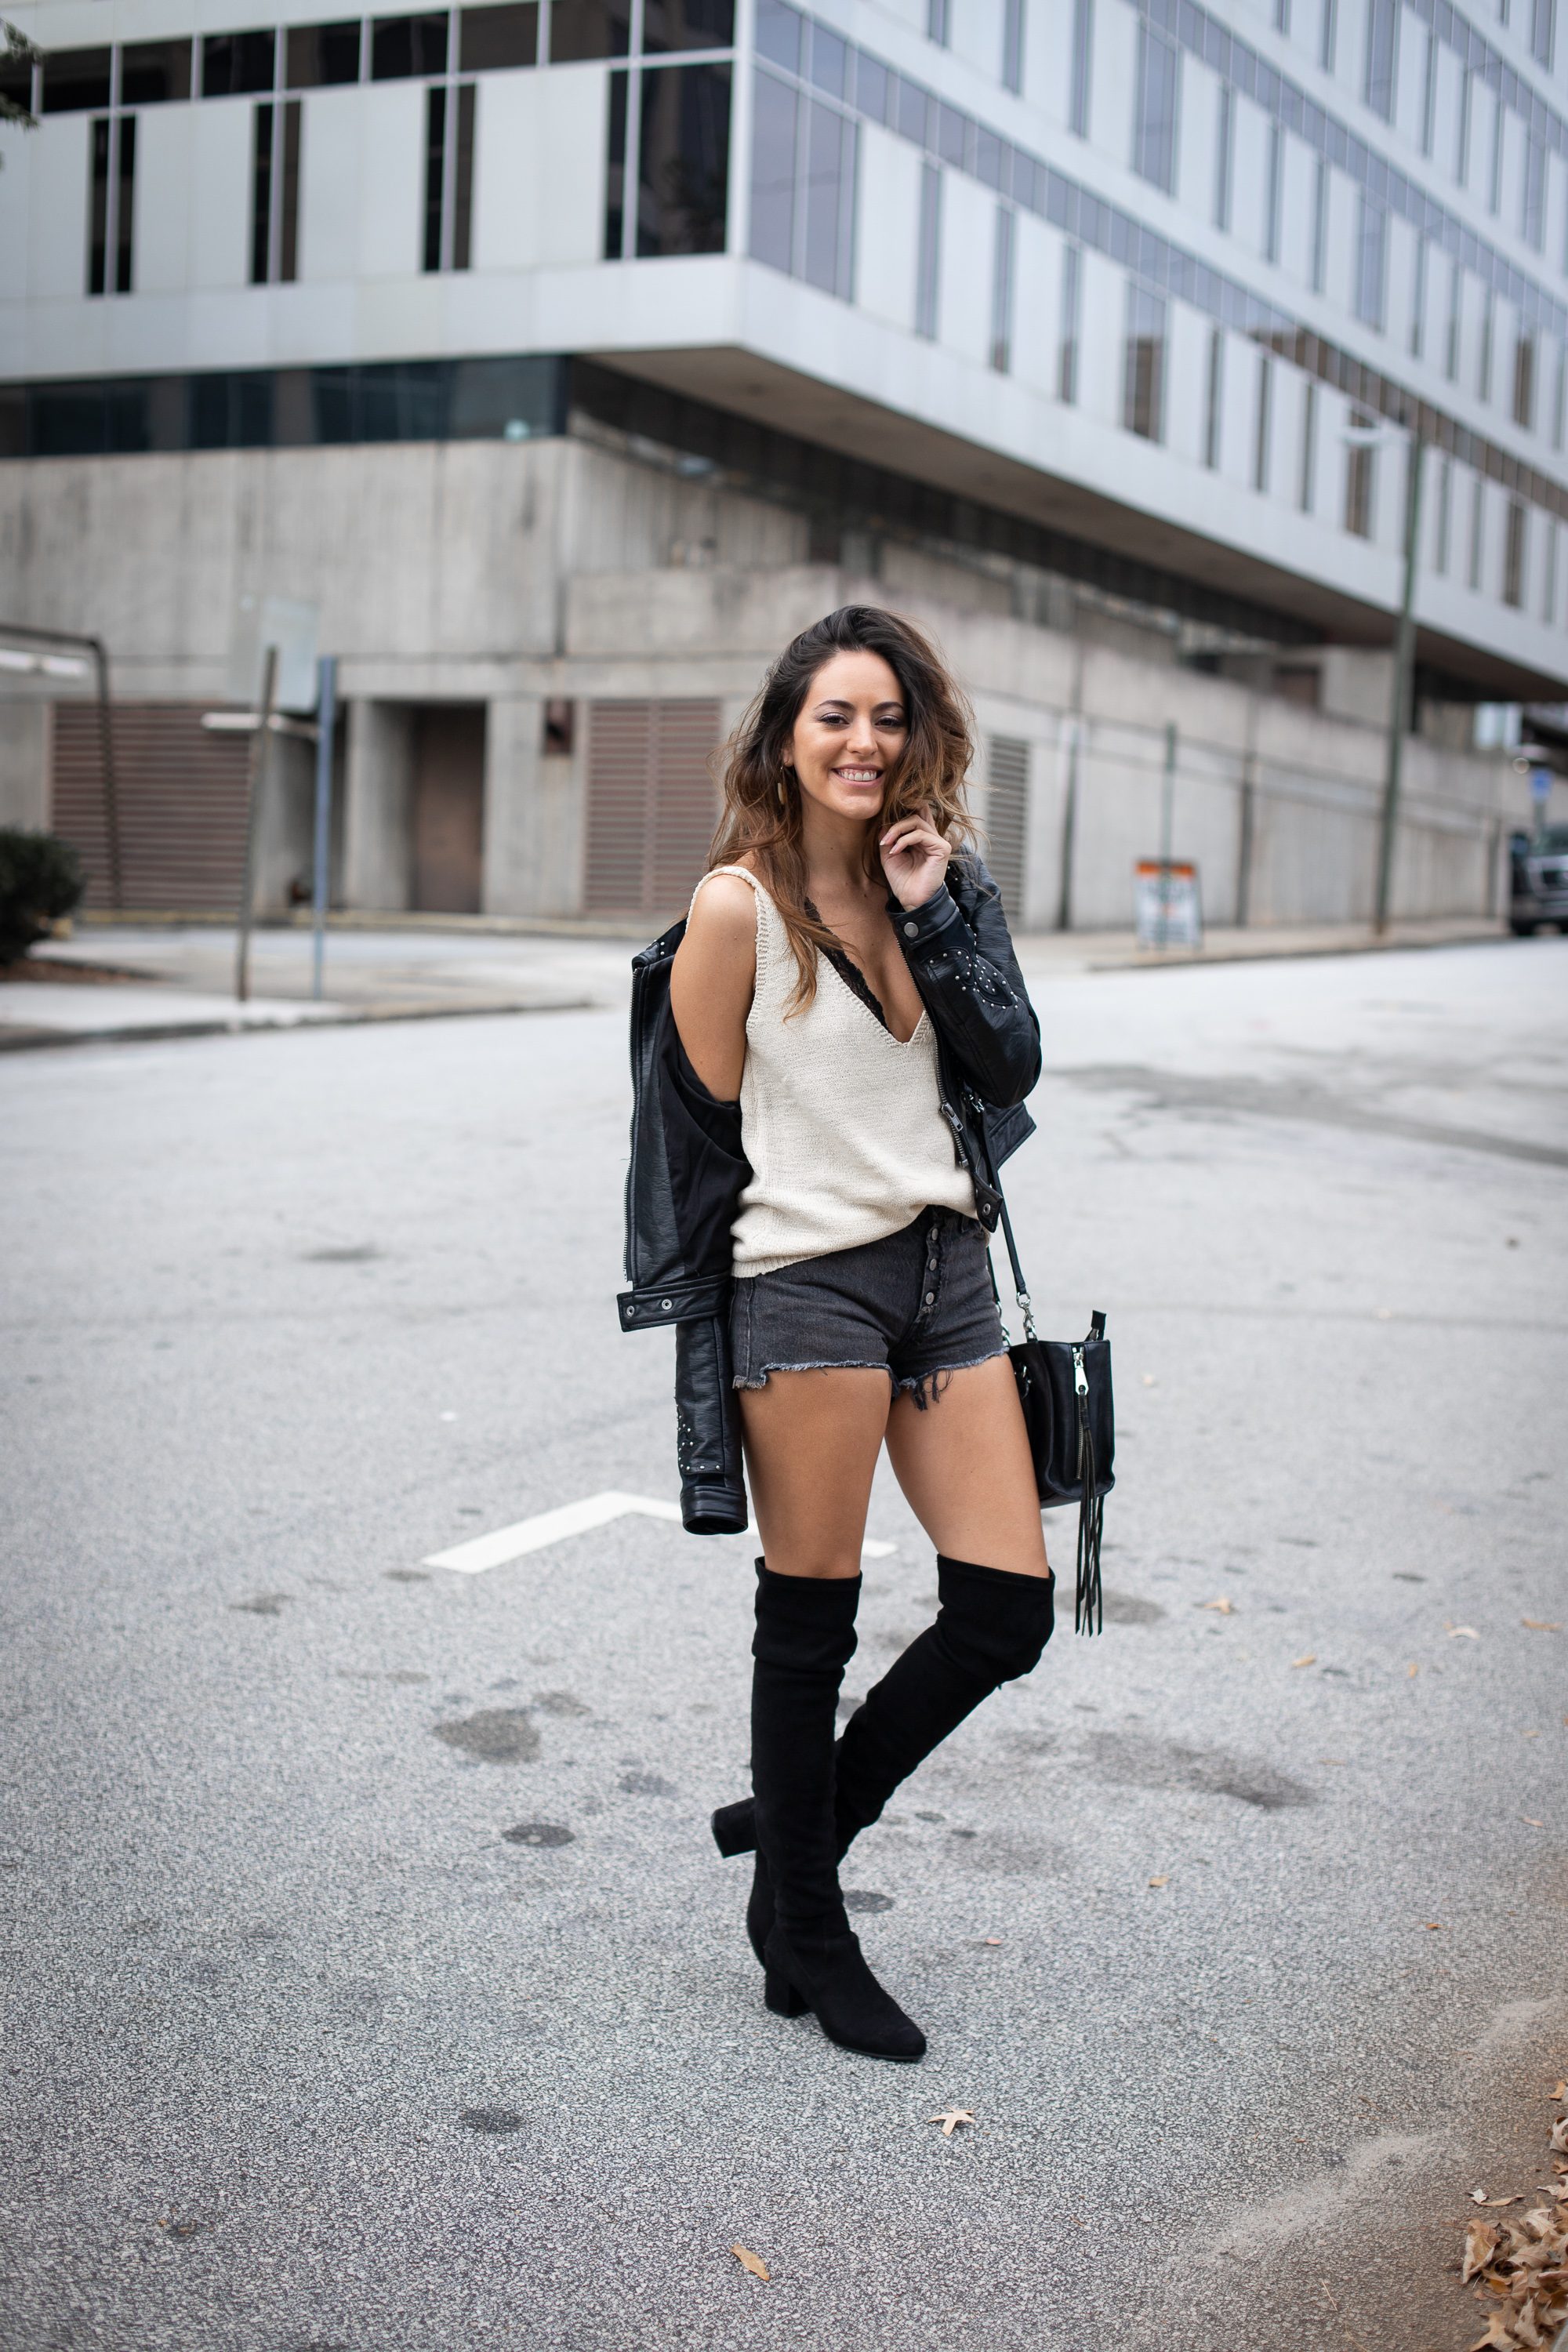 edgy city outfit ideas, how to wear otk boots, otk boots with shorts, how to wear over the knee boots with shorts, fall outfit ideas, fall style, studded faux leather jacket, Levi's 501 Shorts in black eye, aria rose styled, steve madden over the knee boots black